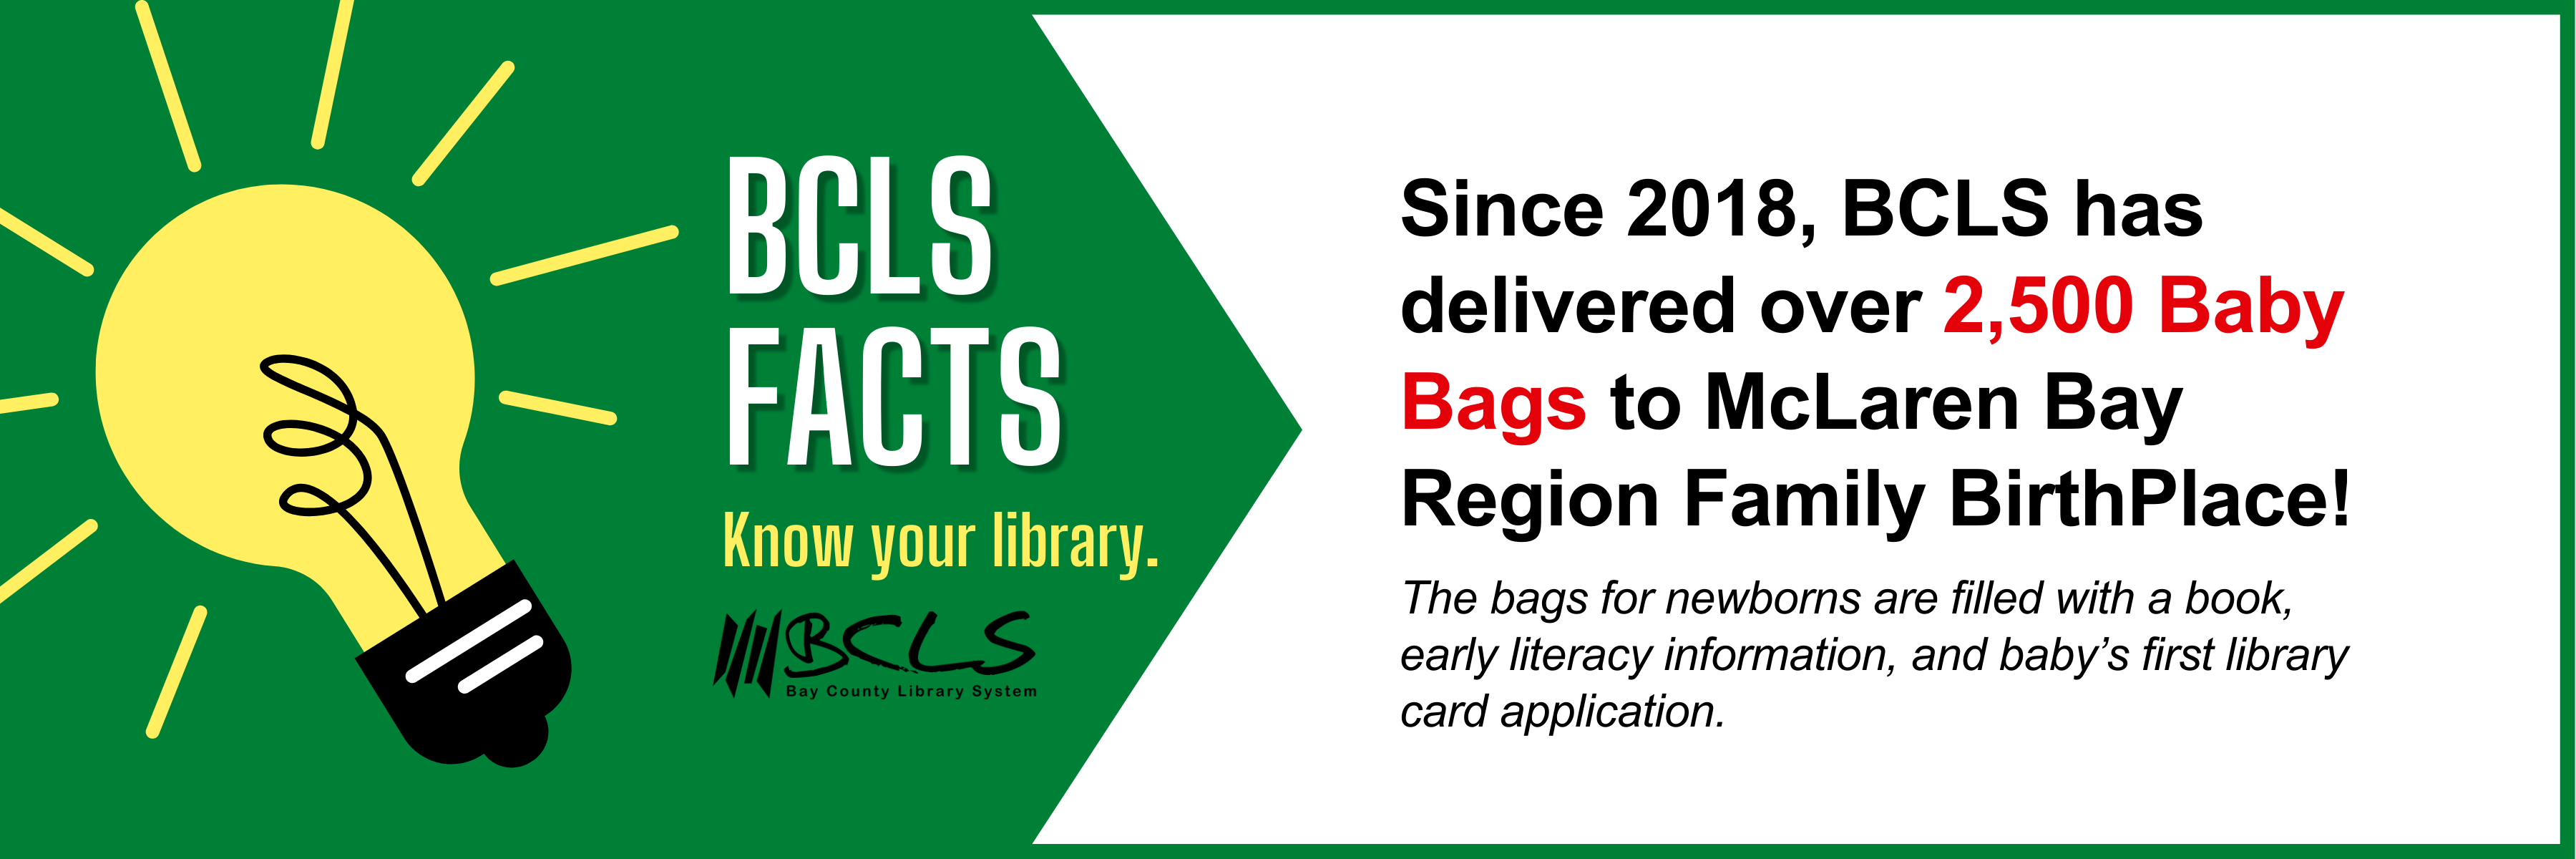 BCLS Facts. Since 2018, BCLS has delivered ovver 2,500 Baby Bags to McLaren Bay Region Family Birthplace.